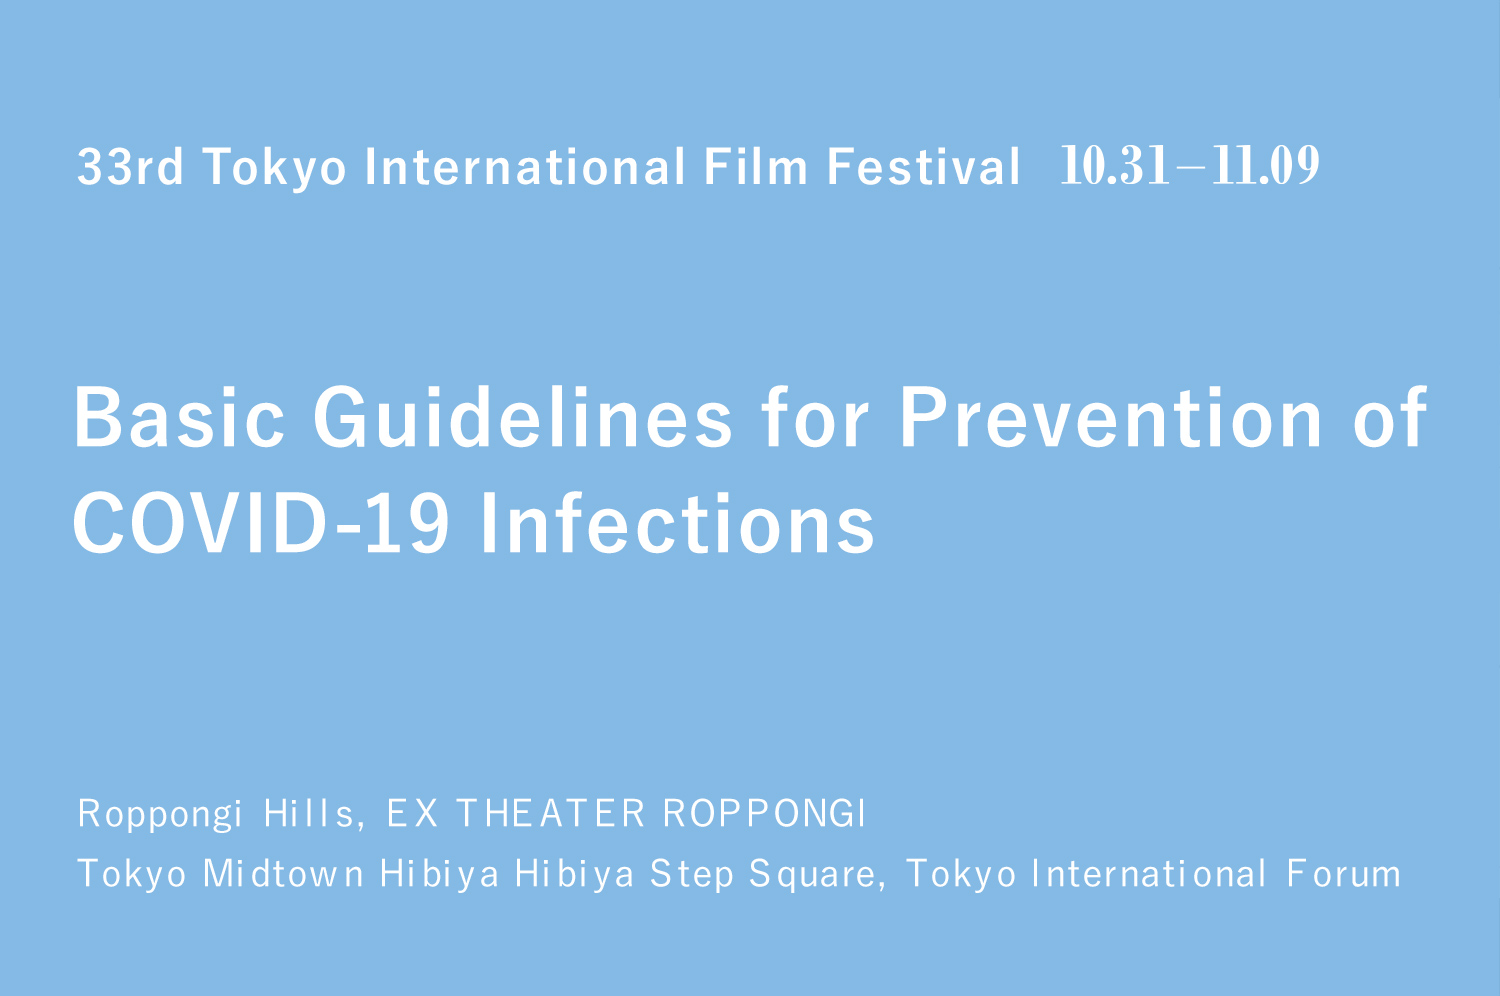 Basic Guidelines for Prevention of COVID-19 Infections